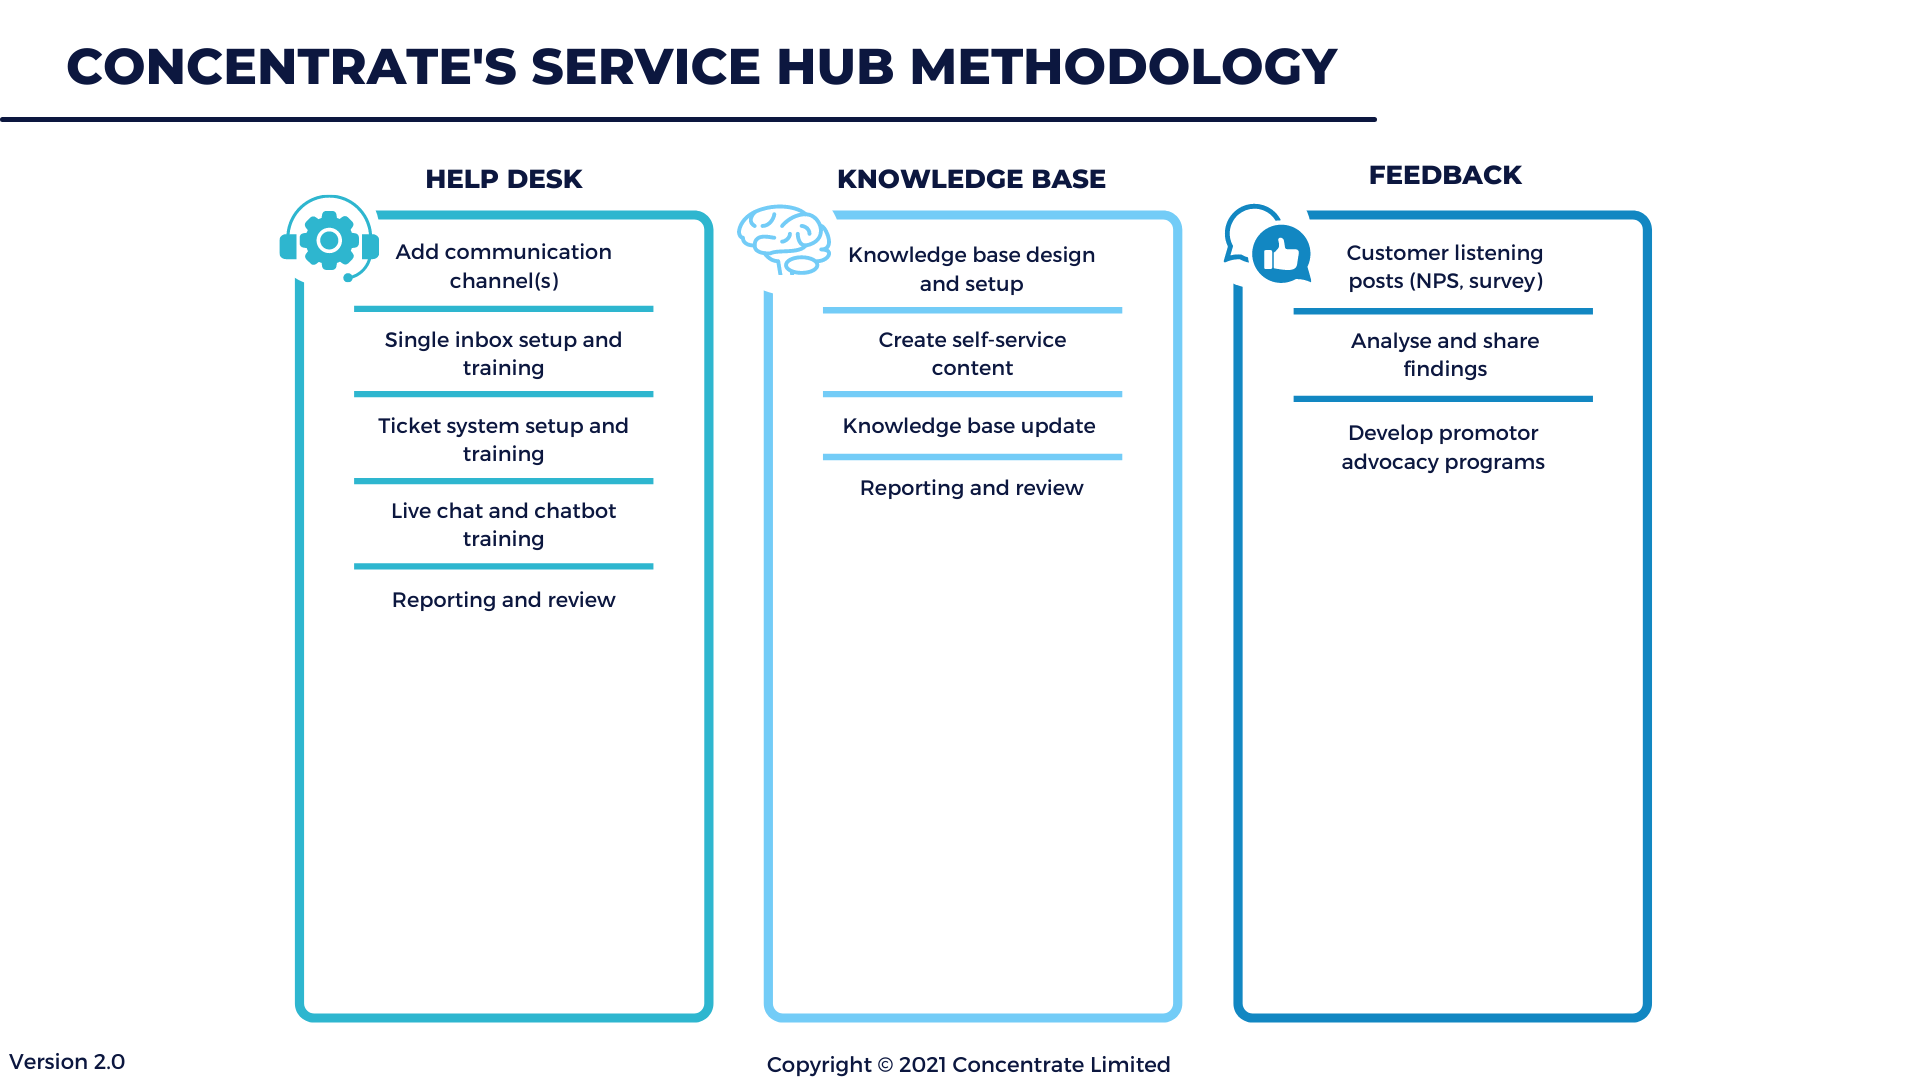 8 - CONCENTRATES SERVICE HUB METHODOLOGY